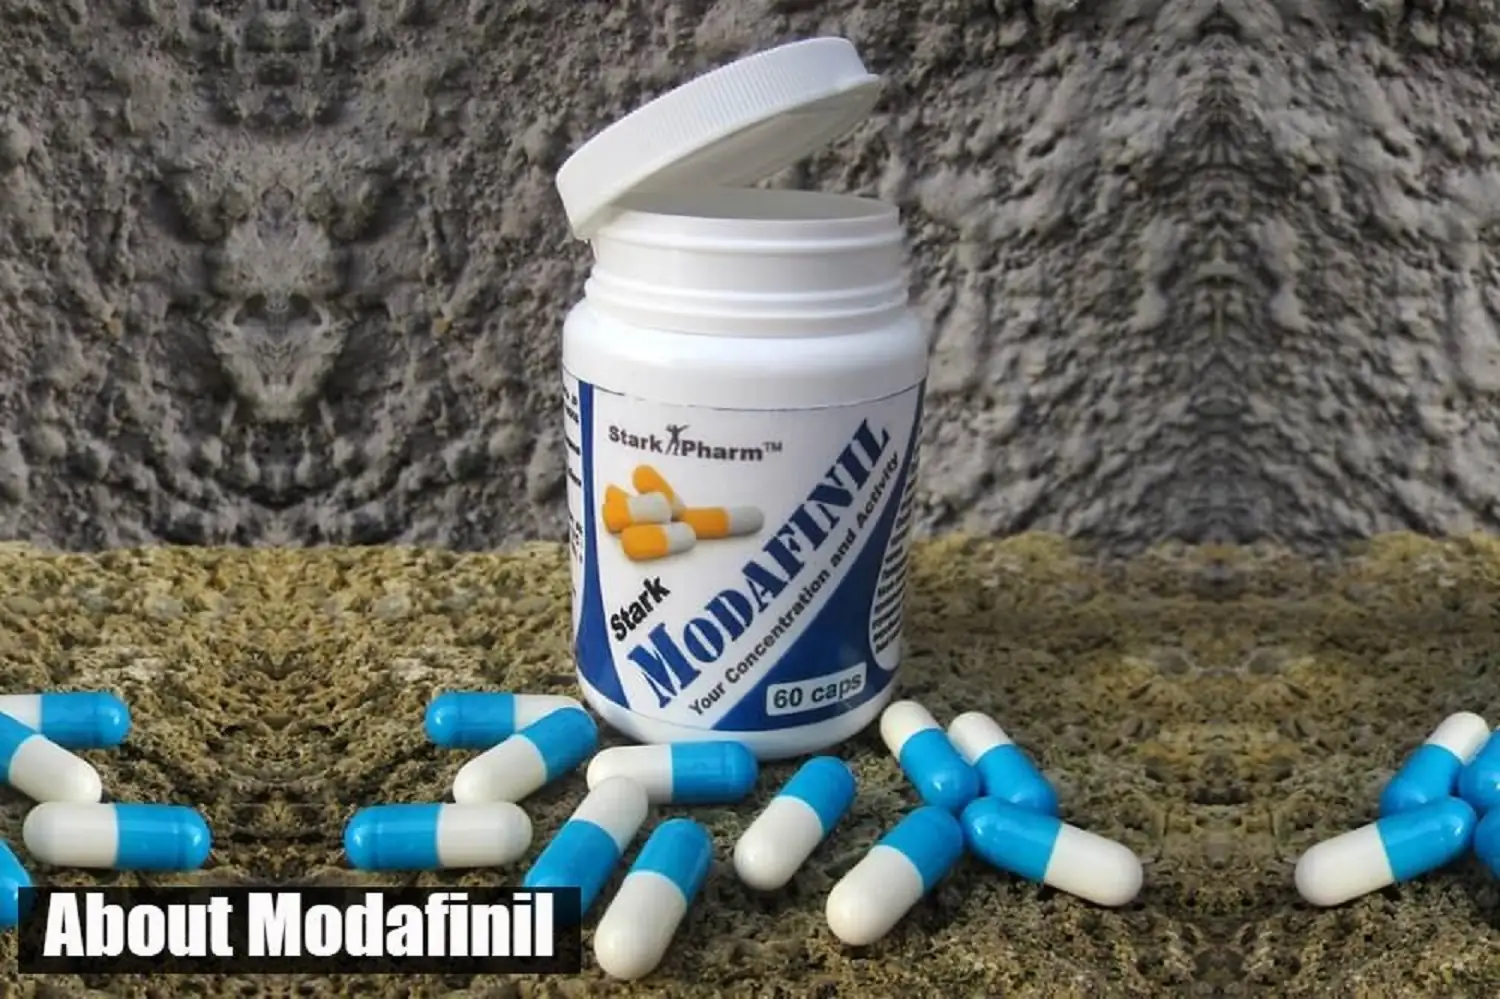 About Modafinil